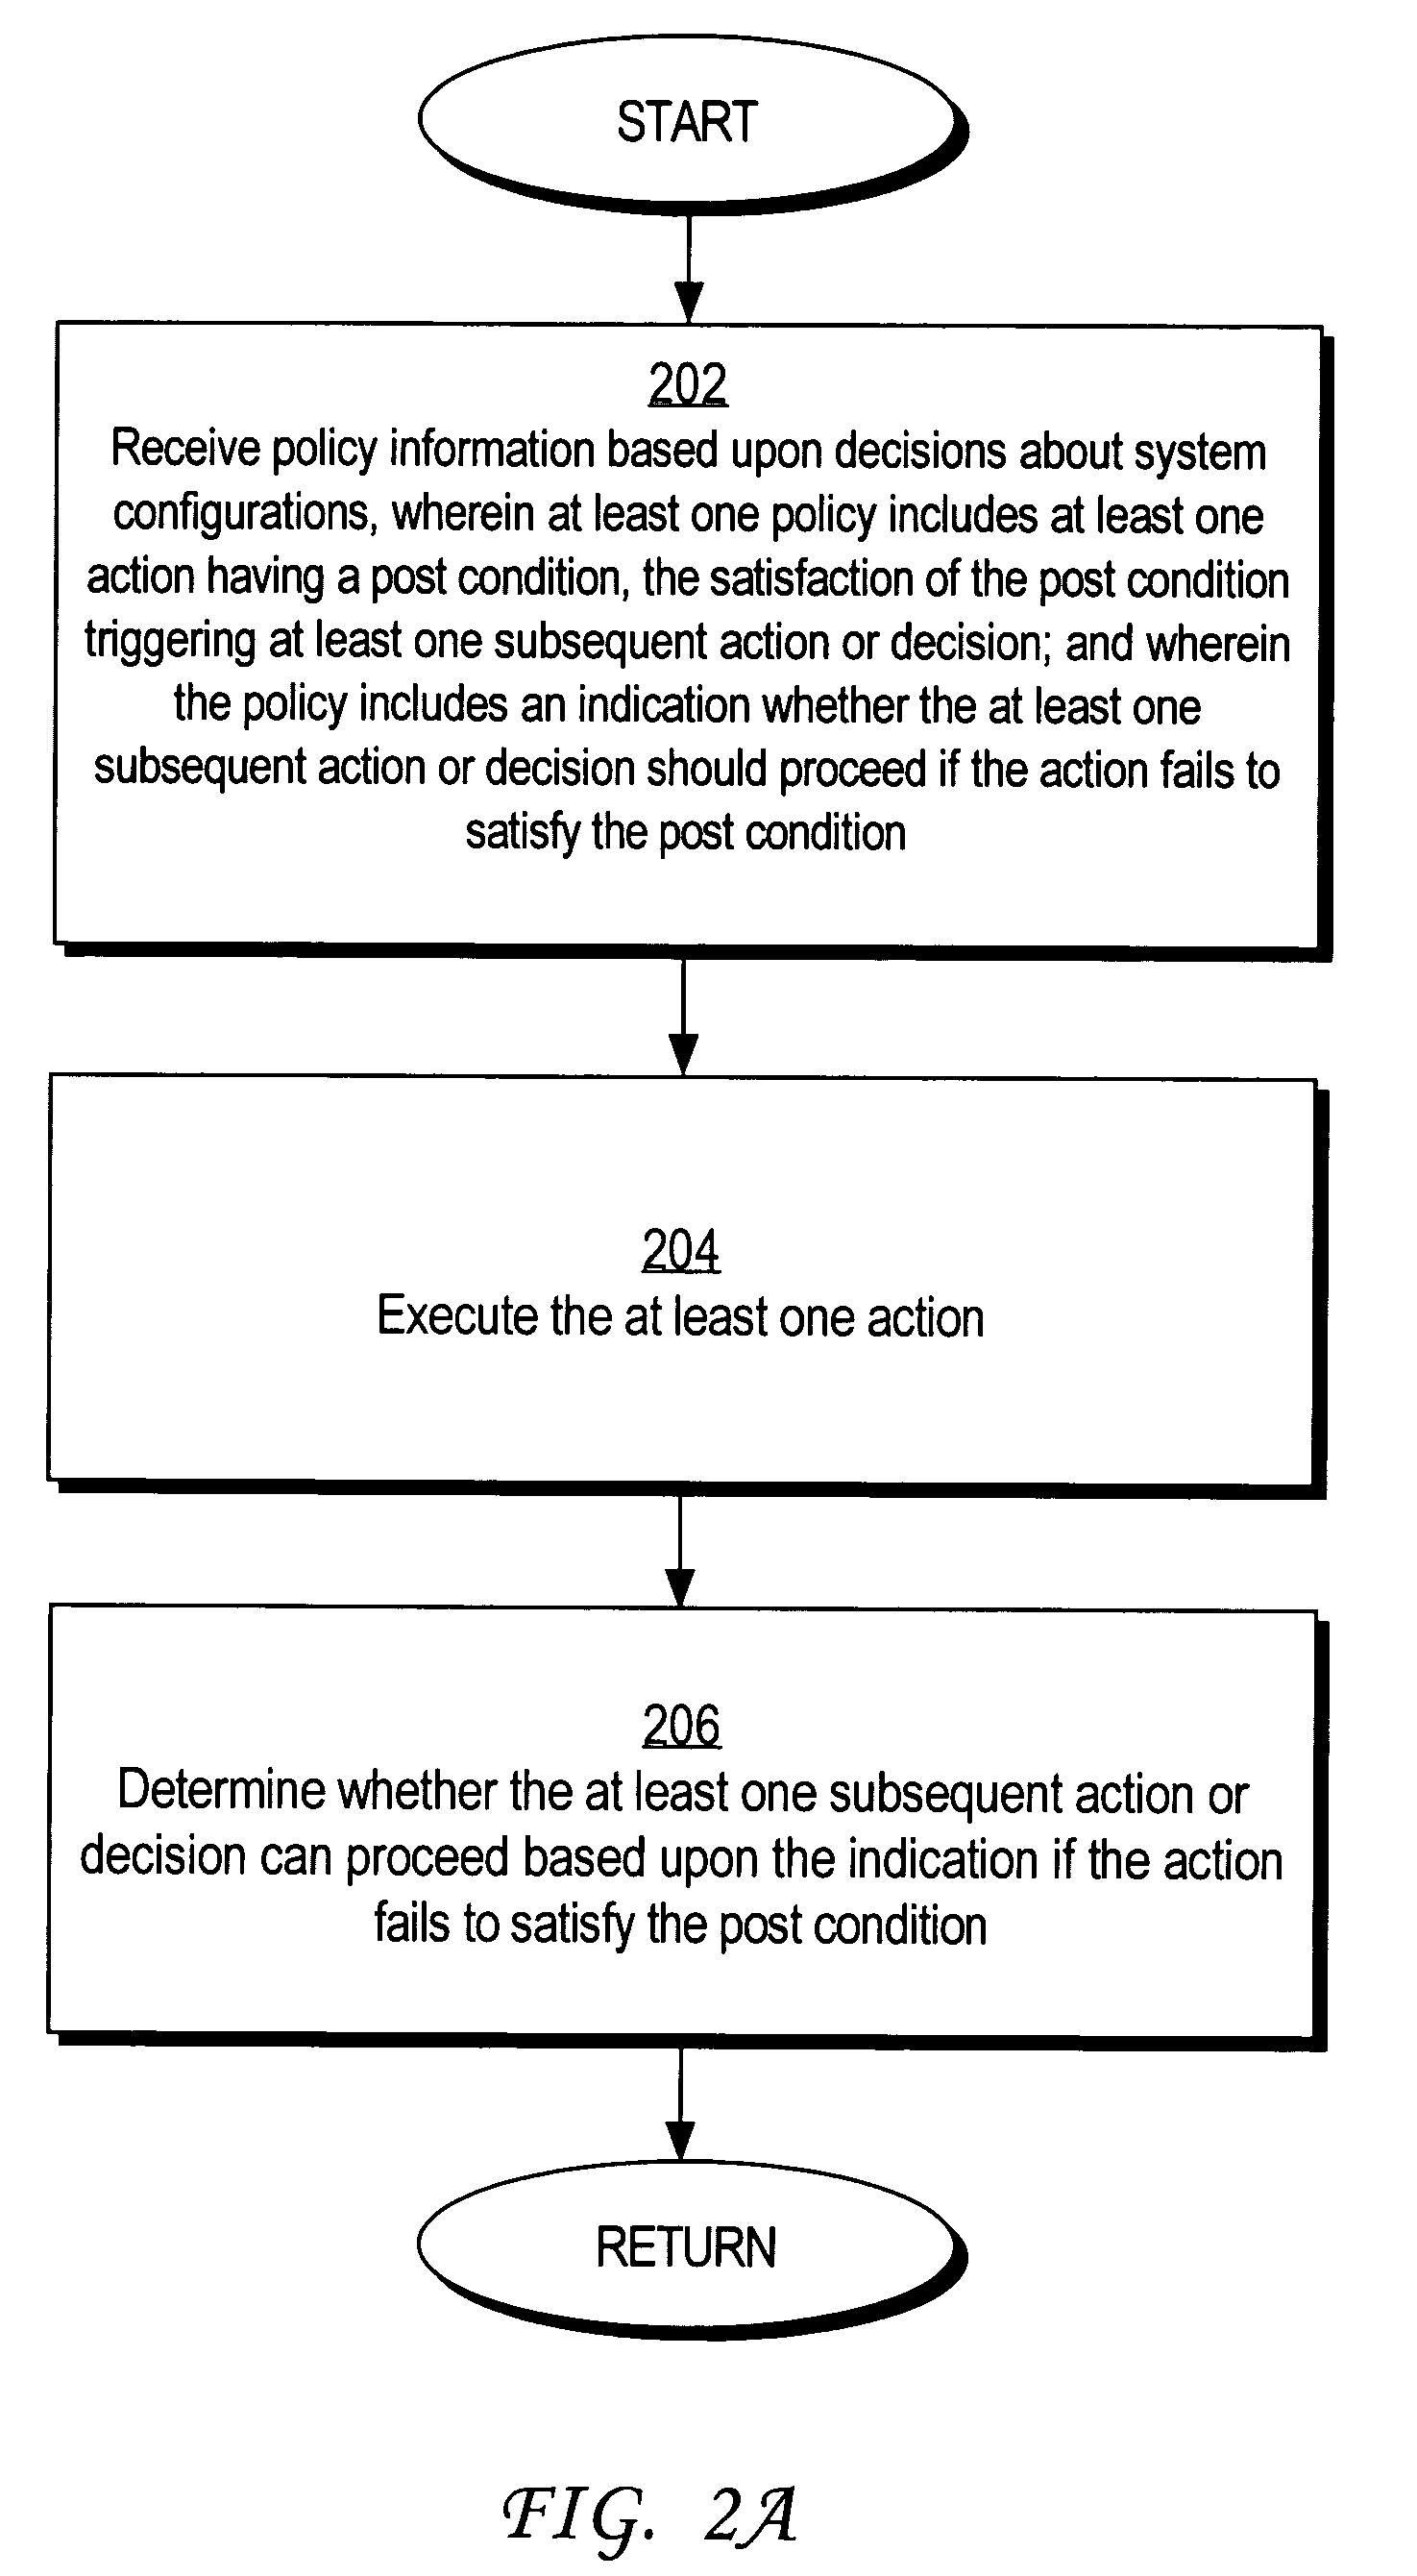 Preventing deadlock in a policy-based computer system